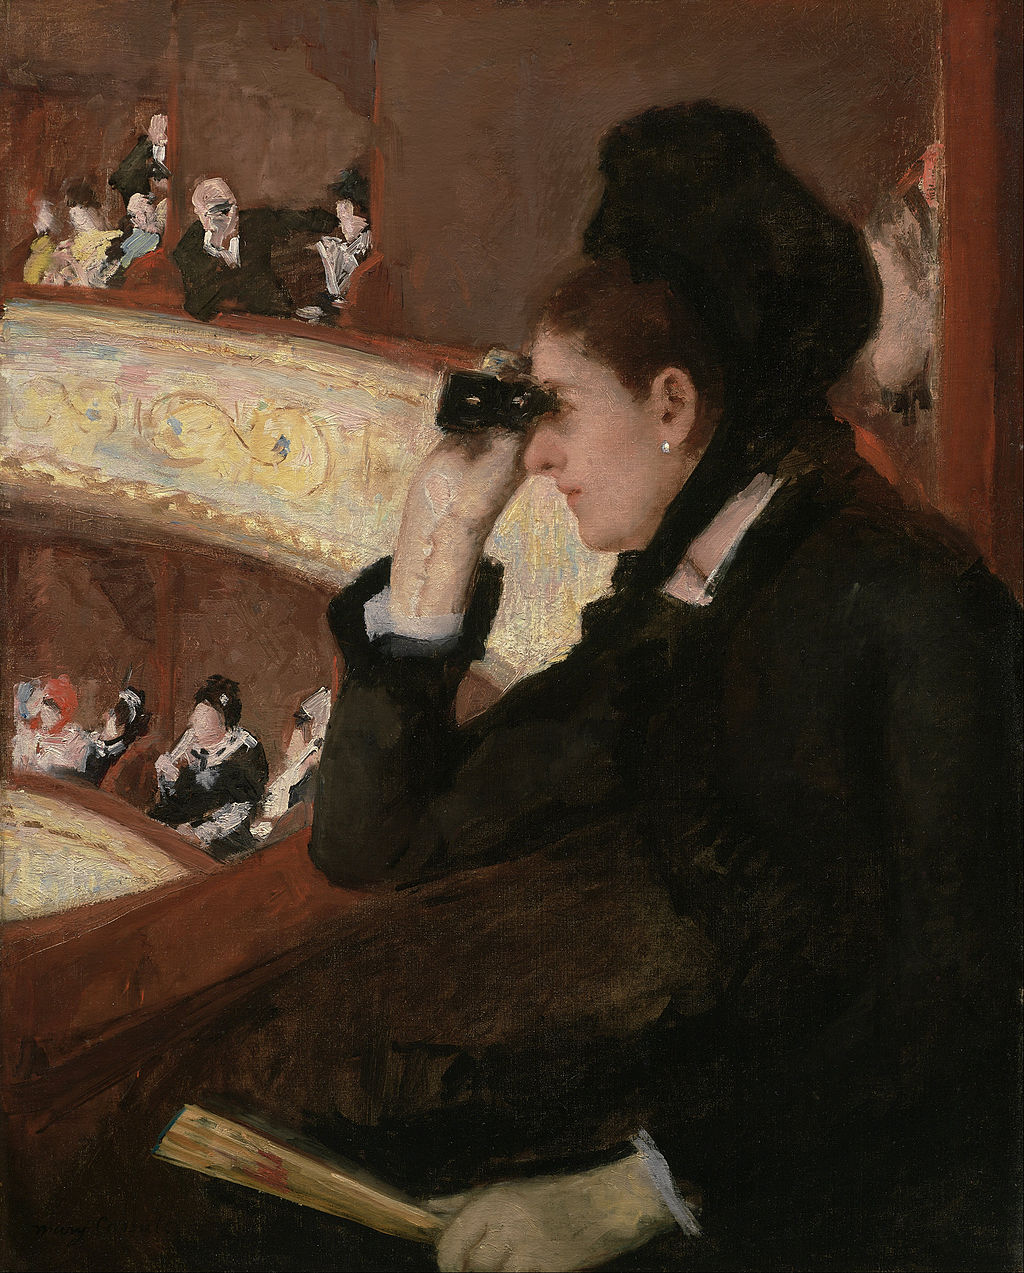 "In the Loge" by Mary Cassatt | Image via Wikimedia Commons